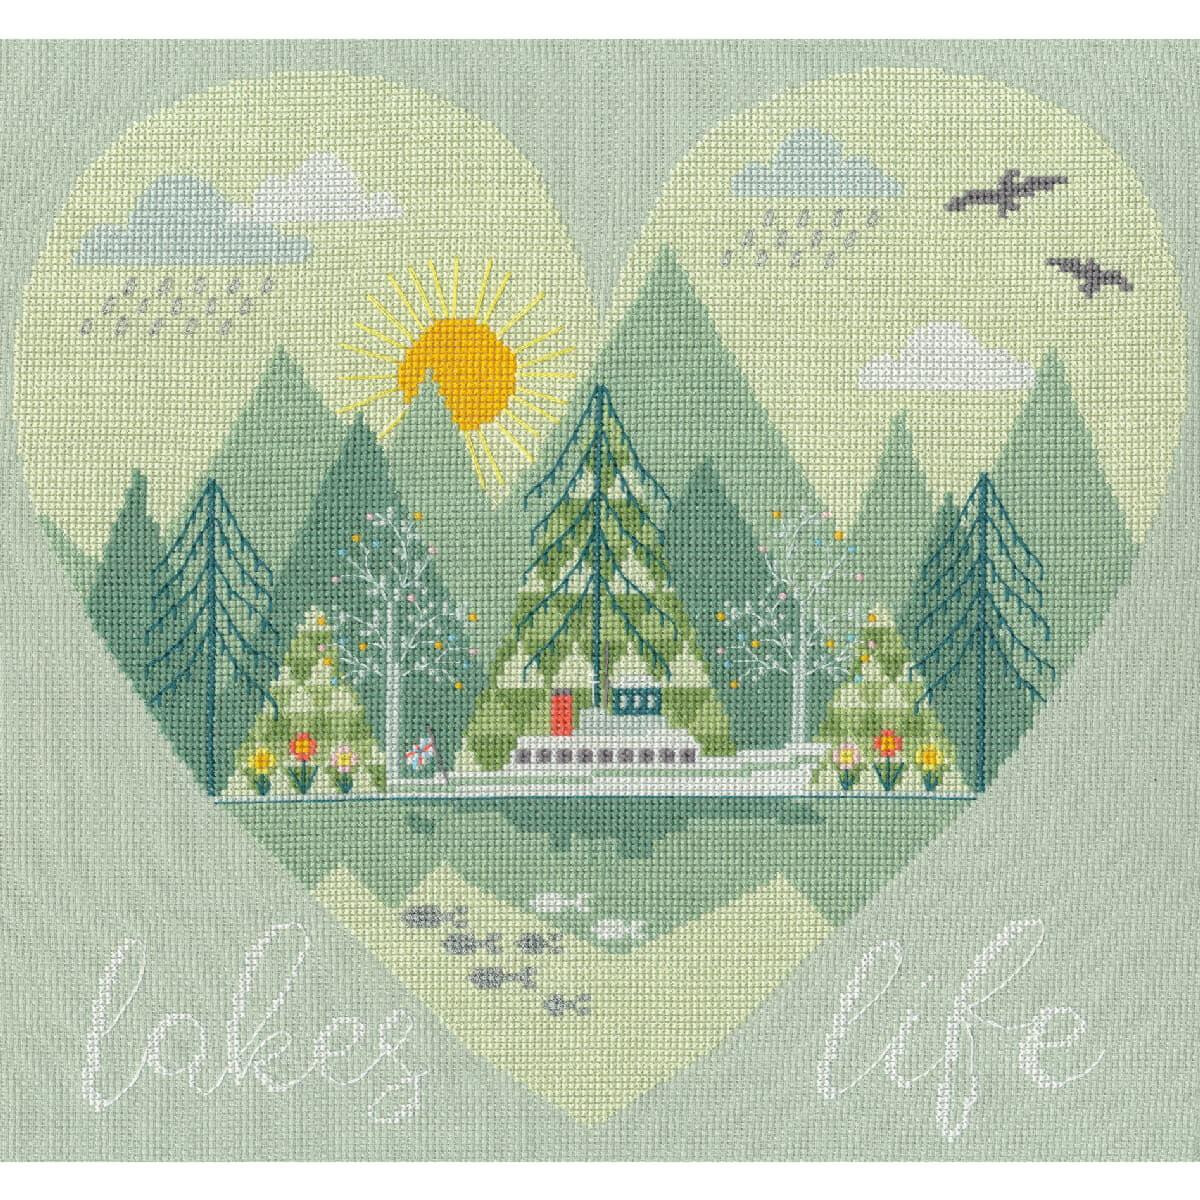 A picturesque cross stitch design of a peaceful lakeside...